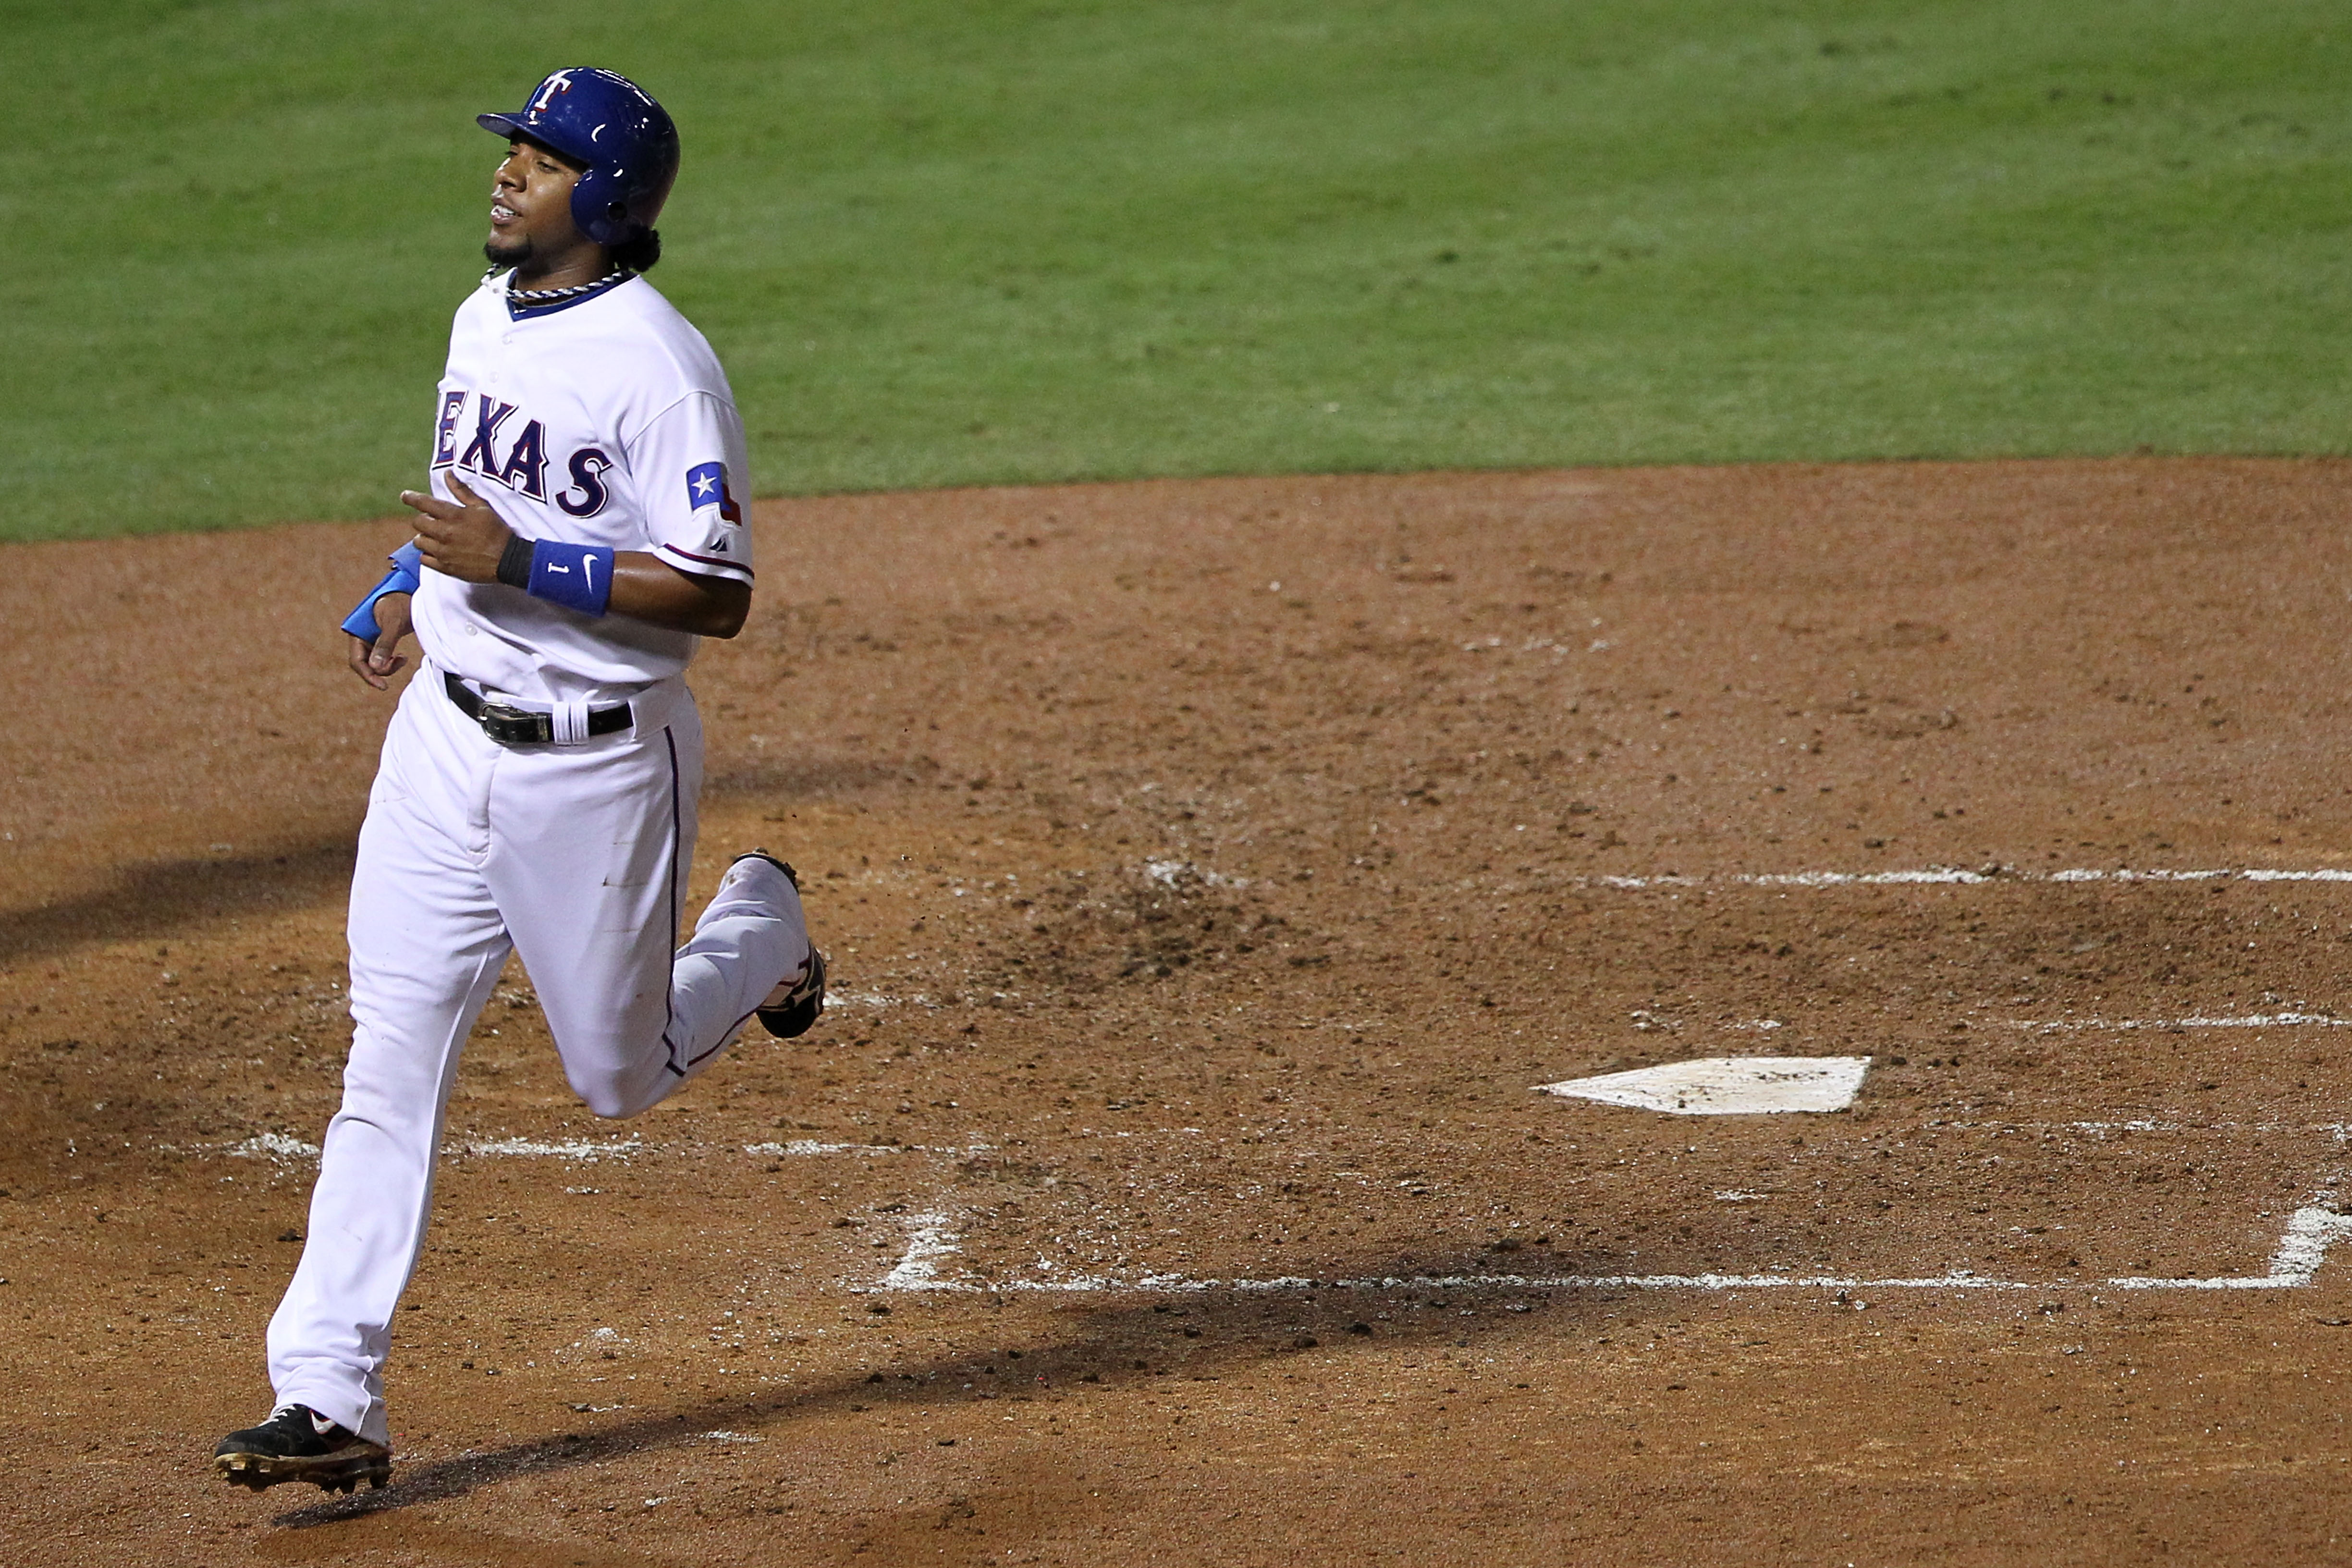 10 Reasons Elvis Andrus Will Be the AL's Starting Shortstop in the